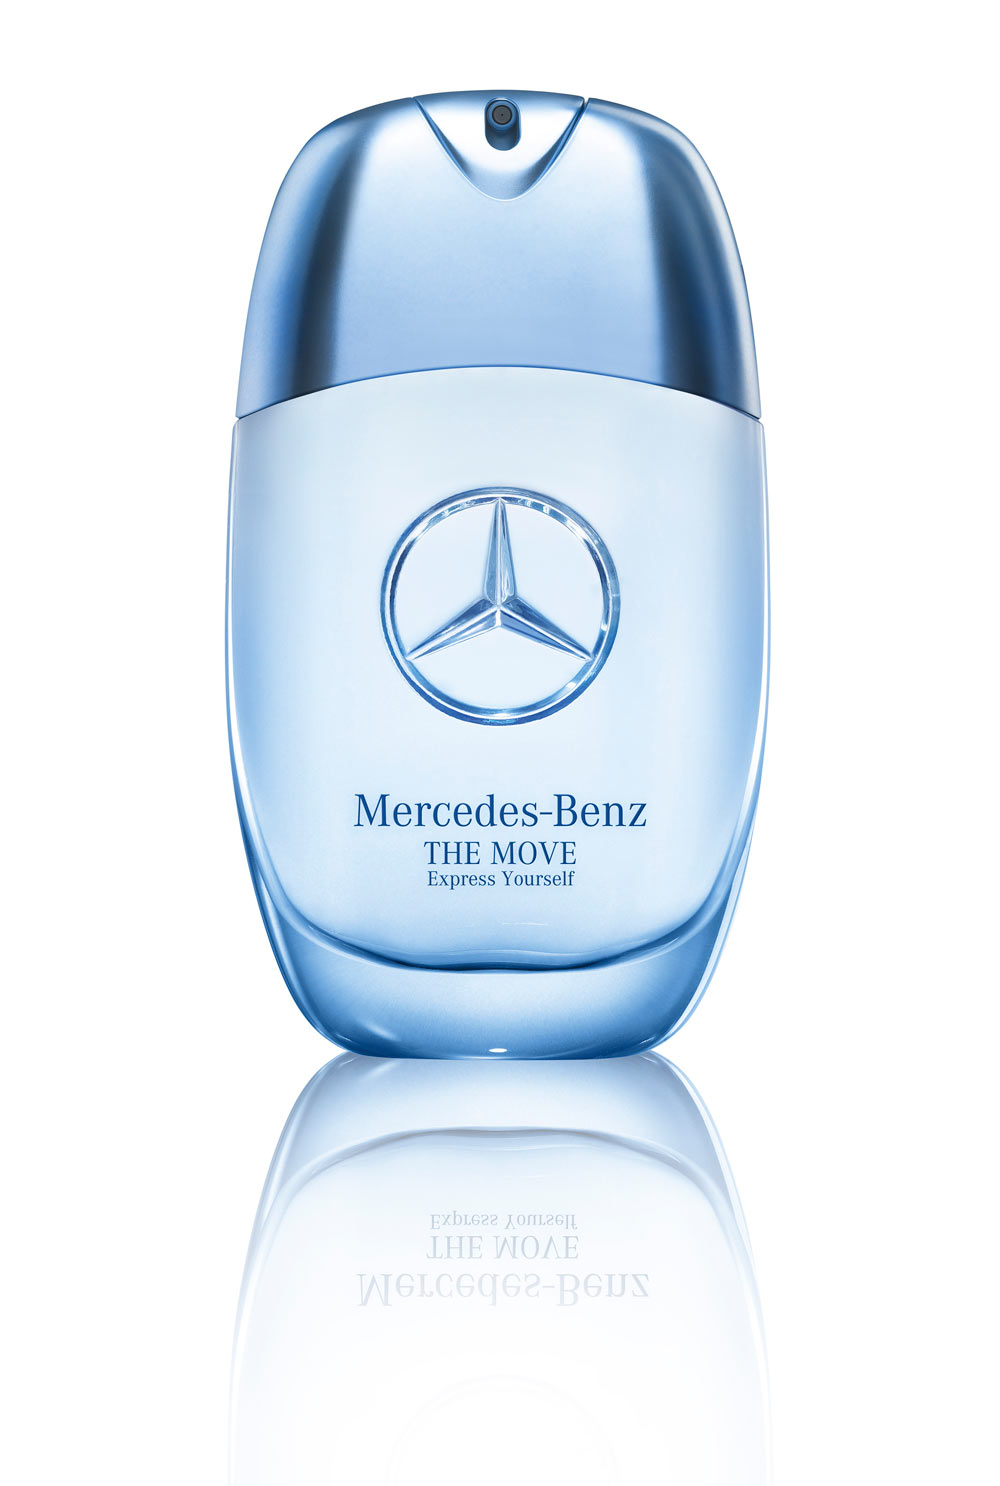 The Move Express Yourself Mercedes-Benz cologne - a new fragrance for men 2020